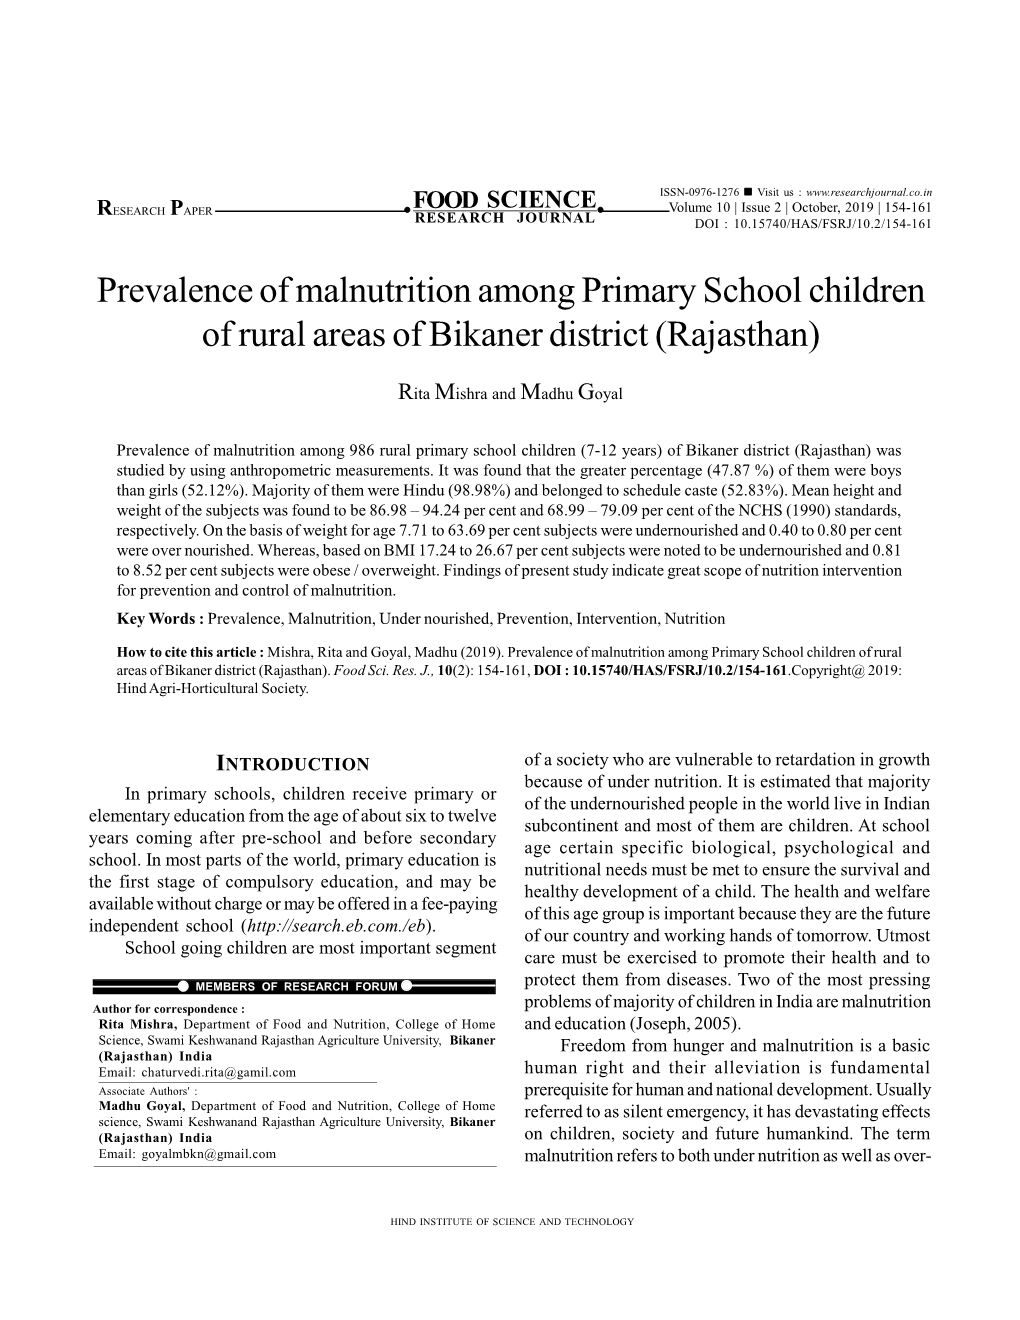 Prevalence of Malnutrition Among Primary School Children of Rural Areas of Bikaner District (Rajasthan)